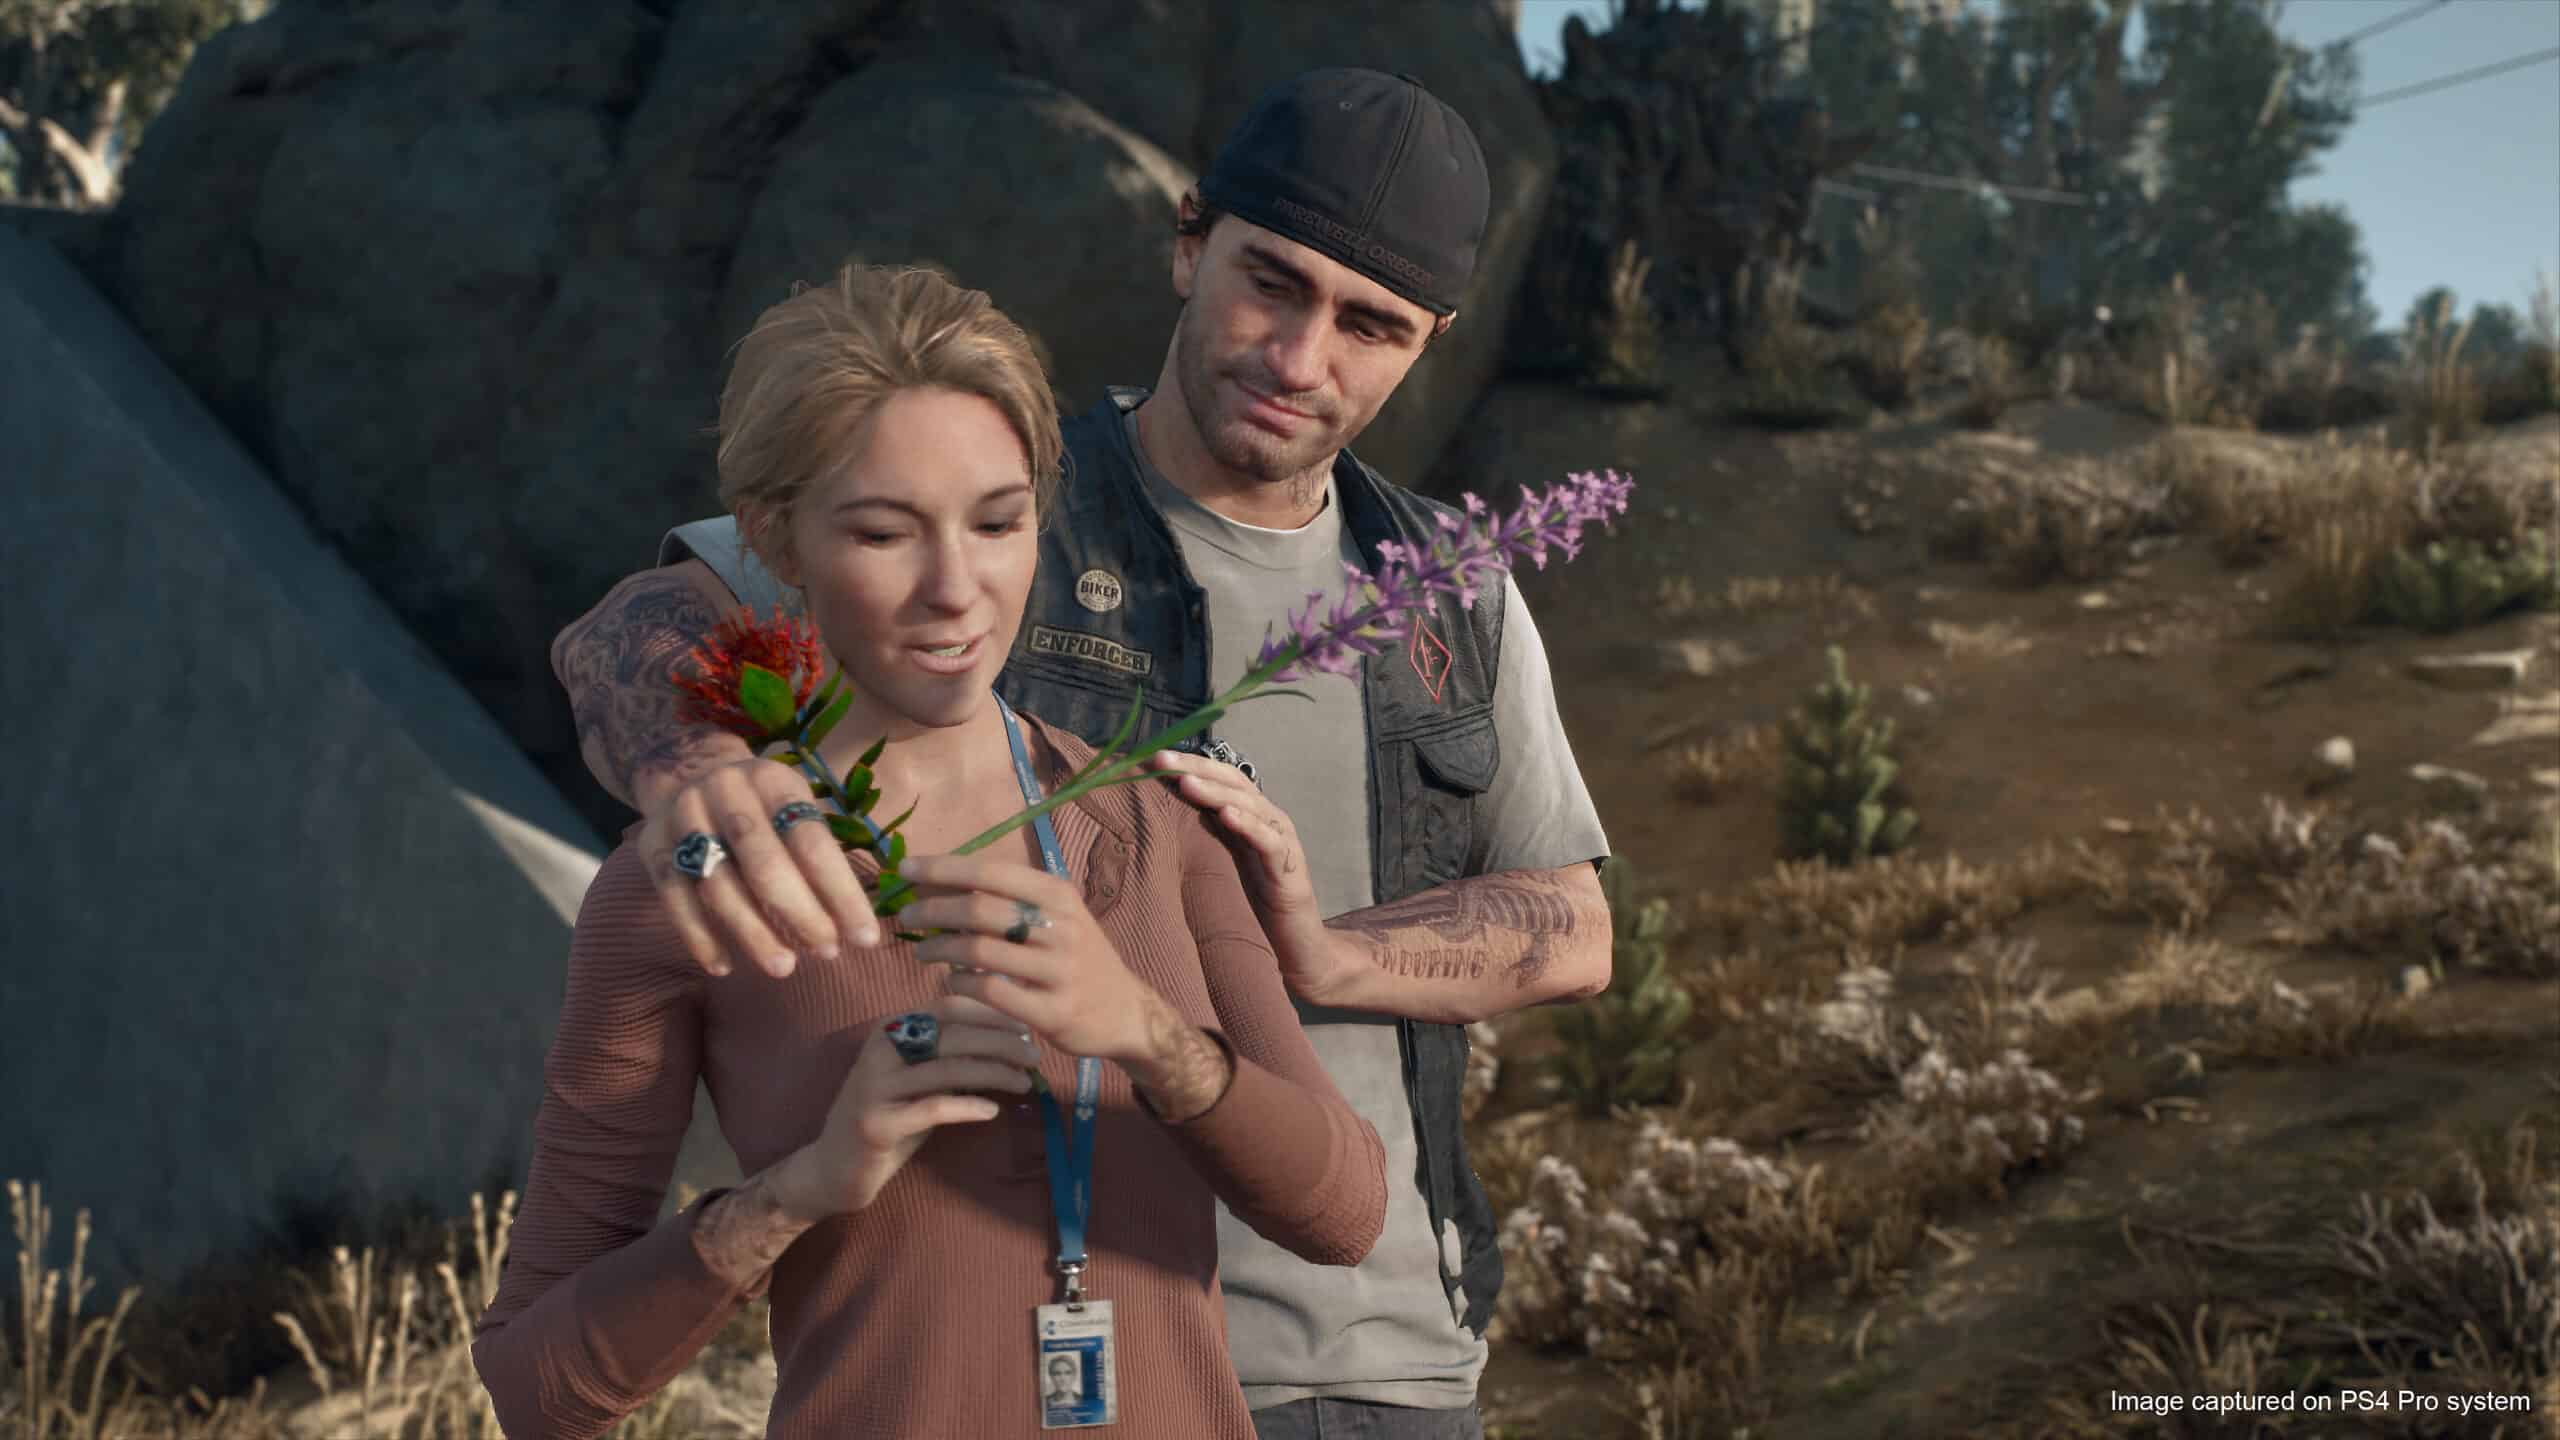 Meet the characters of Days Gone: From Deacon to Sarah, who will survive?